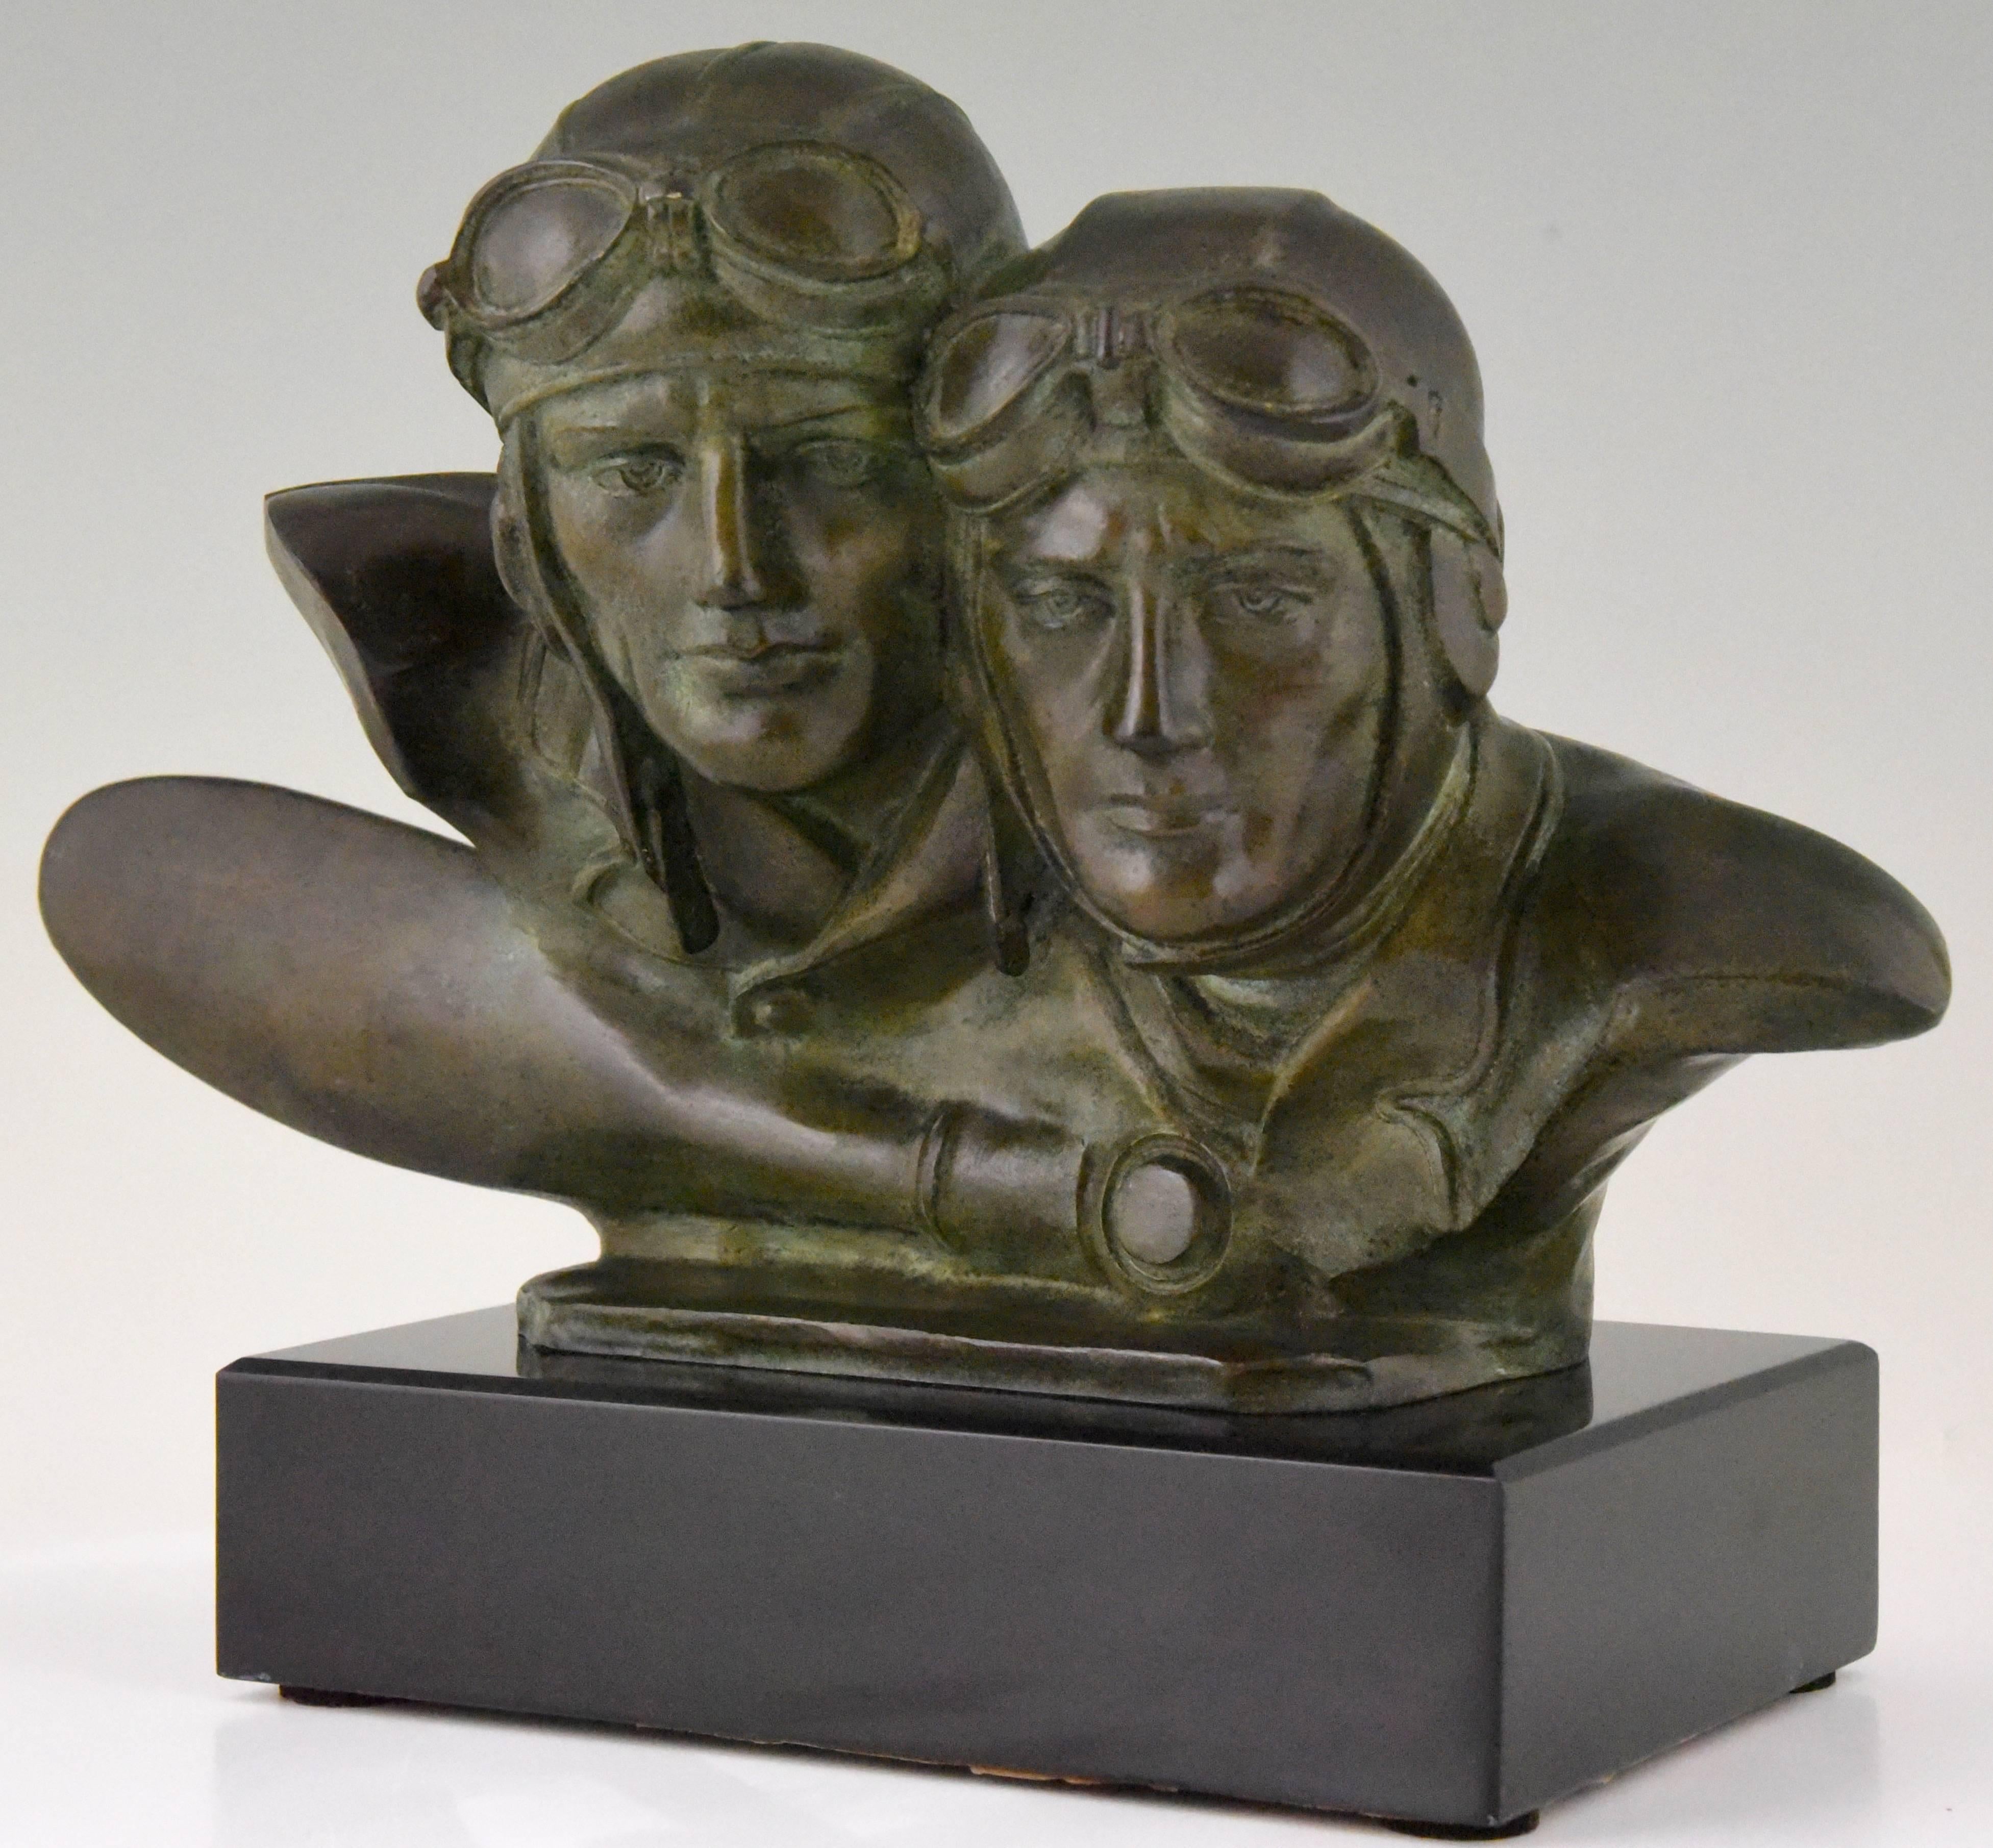 French Art Deco Bronze Sculpture Bust of Two Pilots Aviators Costes and Bellonte France